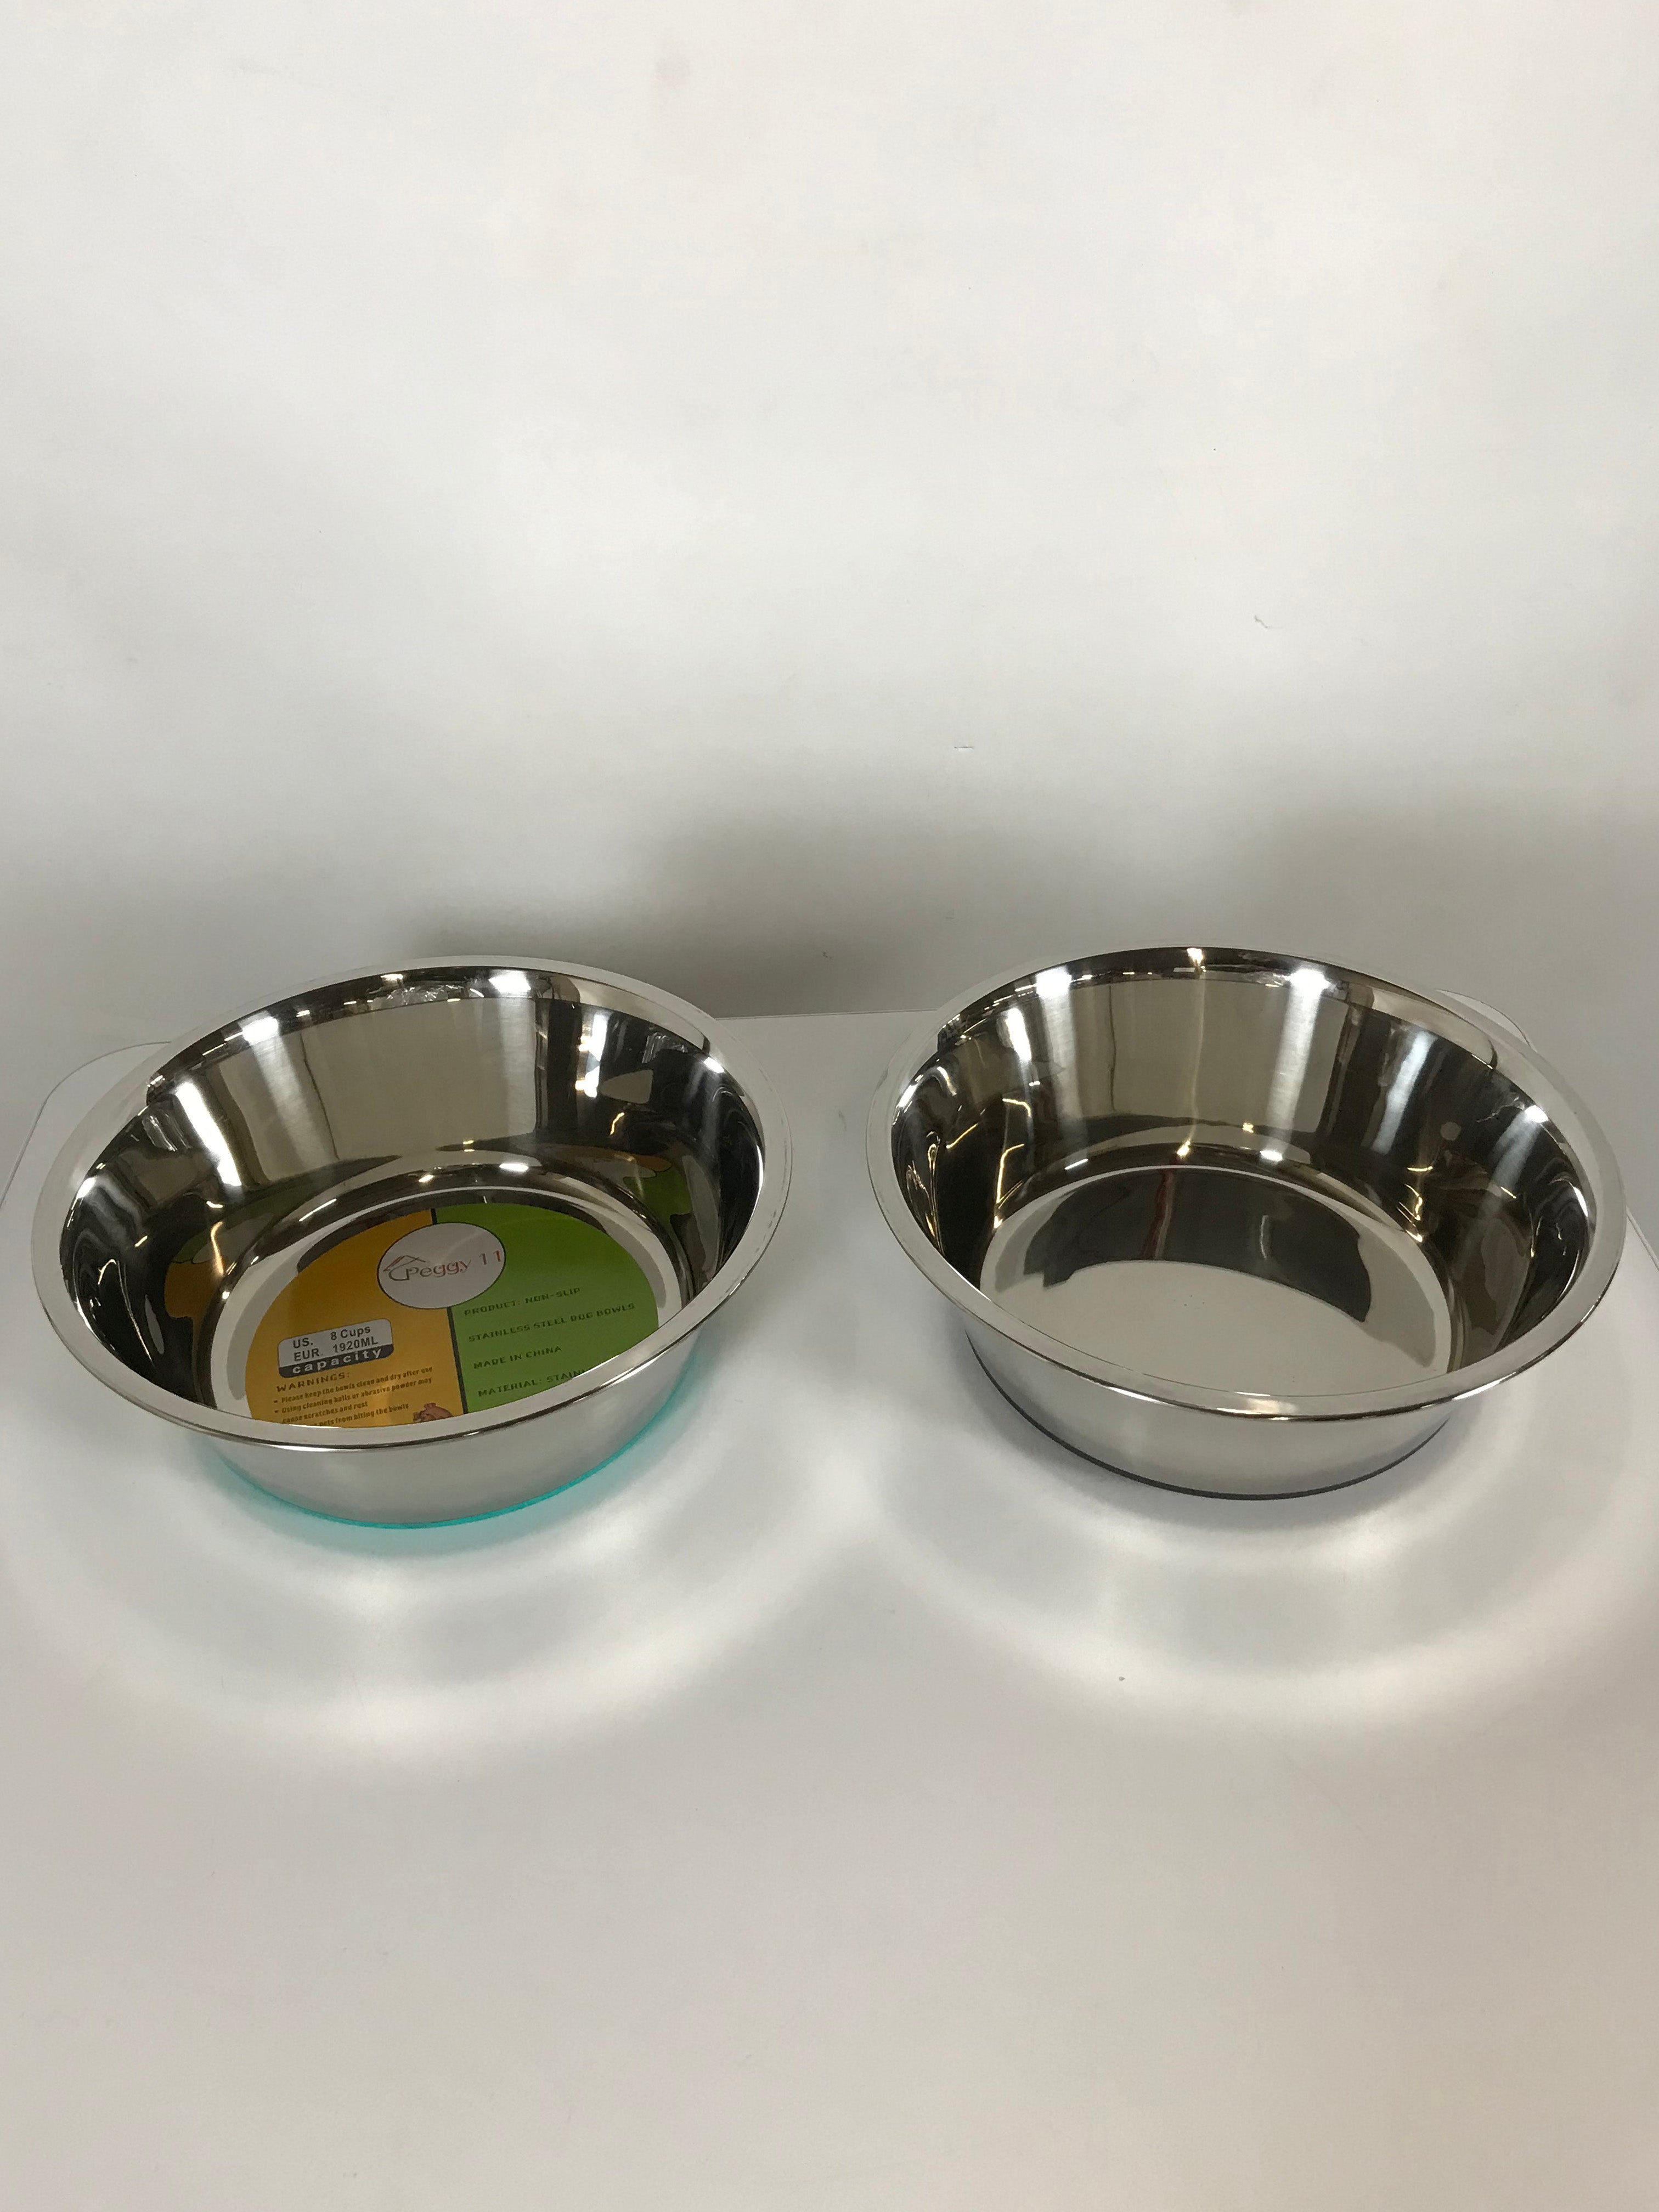 Set of 2 Peggy11 Non-slip Stainless Steel Dog Bowls